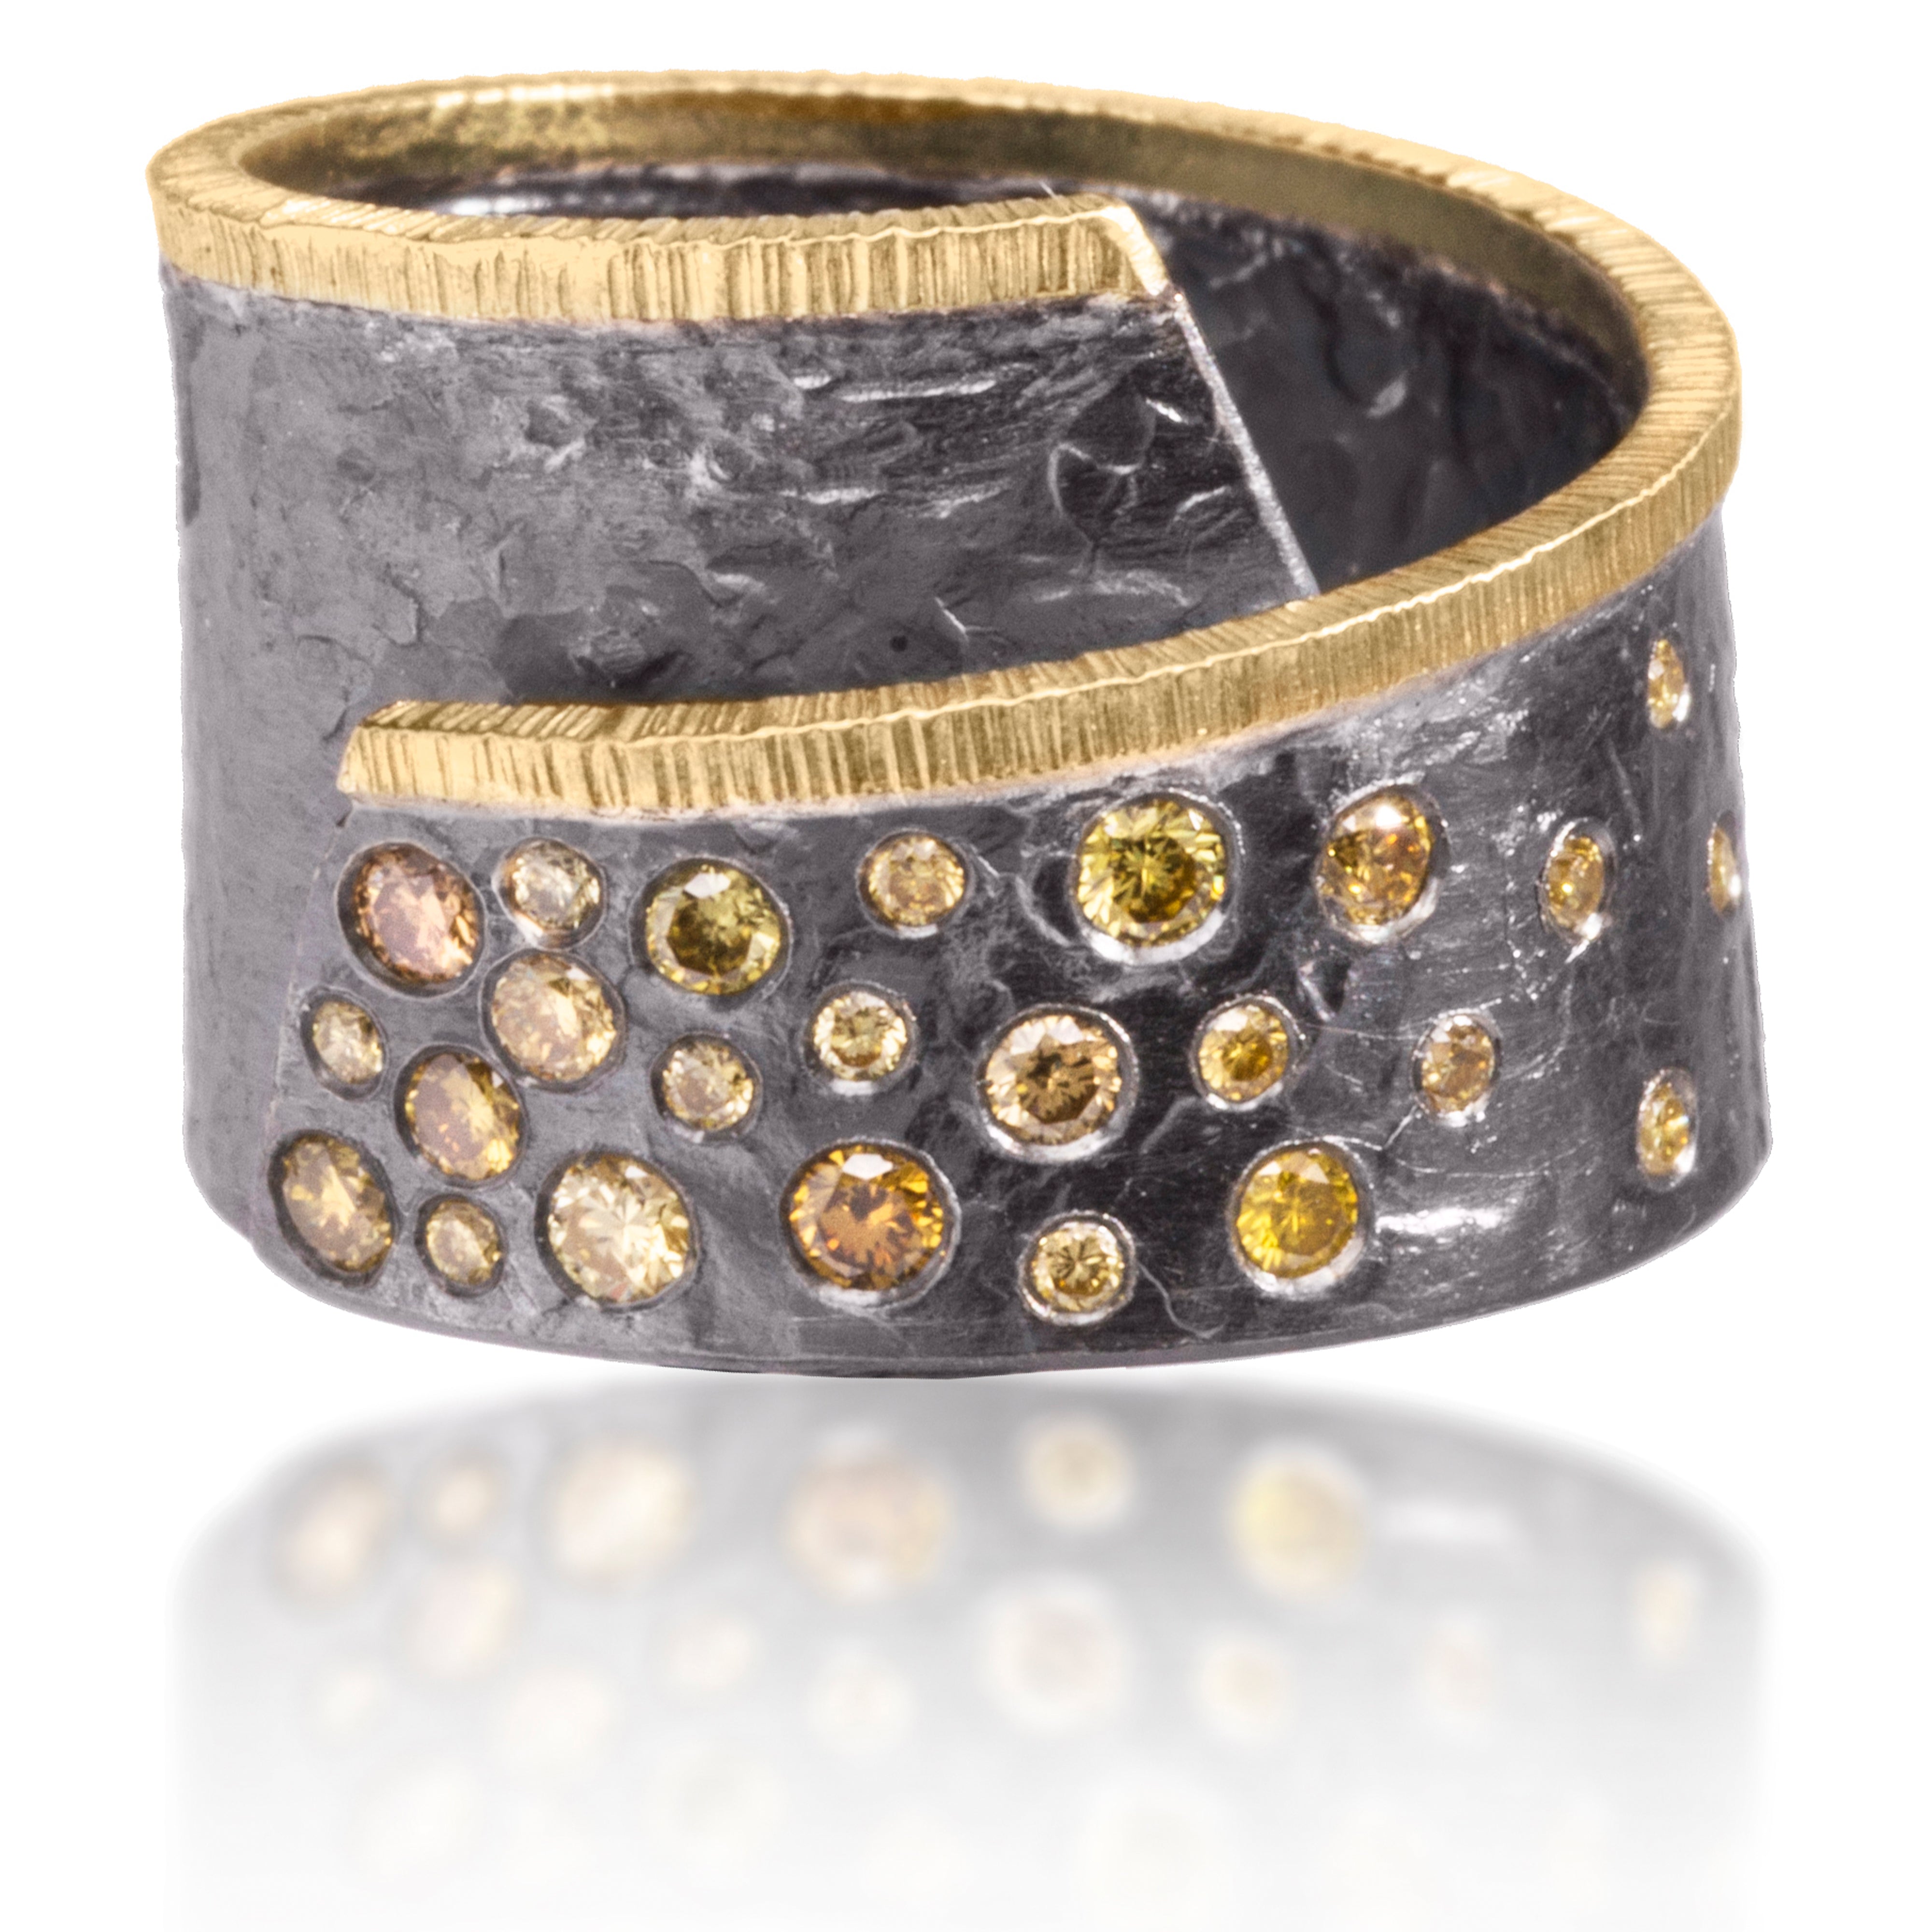 This Cyclone diamond spray ring in 18k gold and oxidized silver is with flush set assorted natural diamonds available in 5 color ways. Hand fabricated, hammer textured. As shown, 0.36 tcw